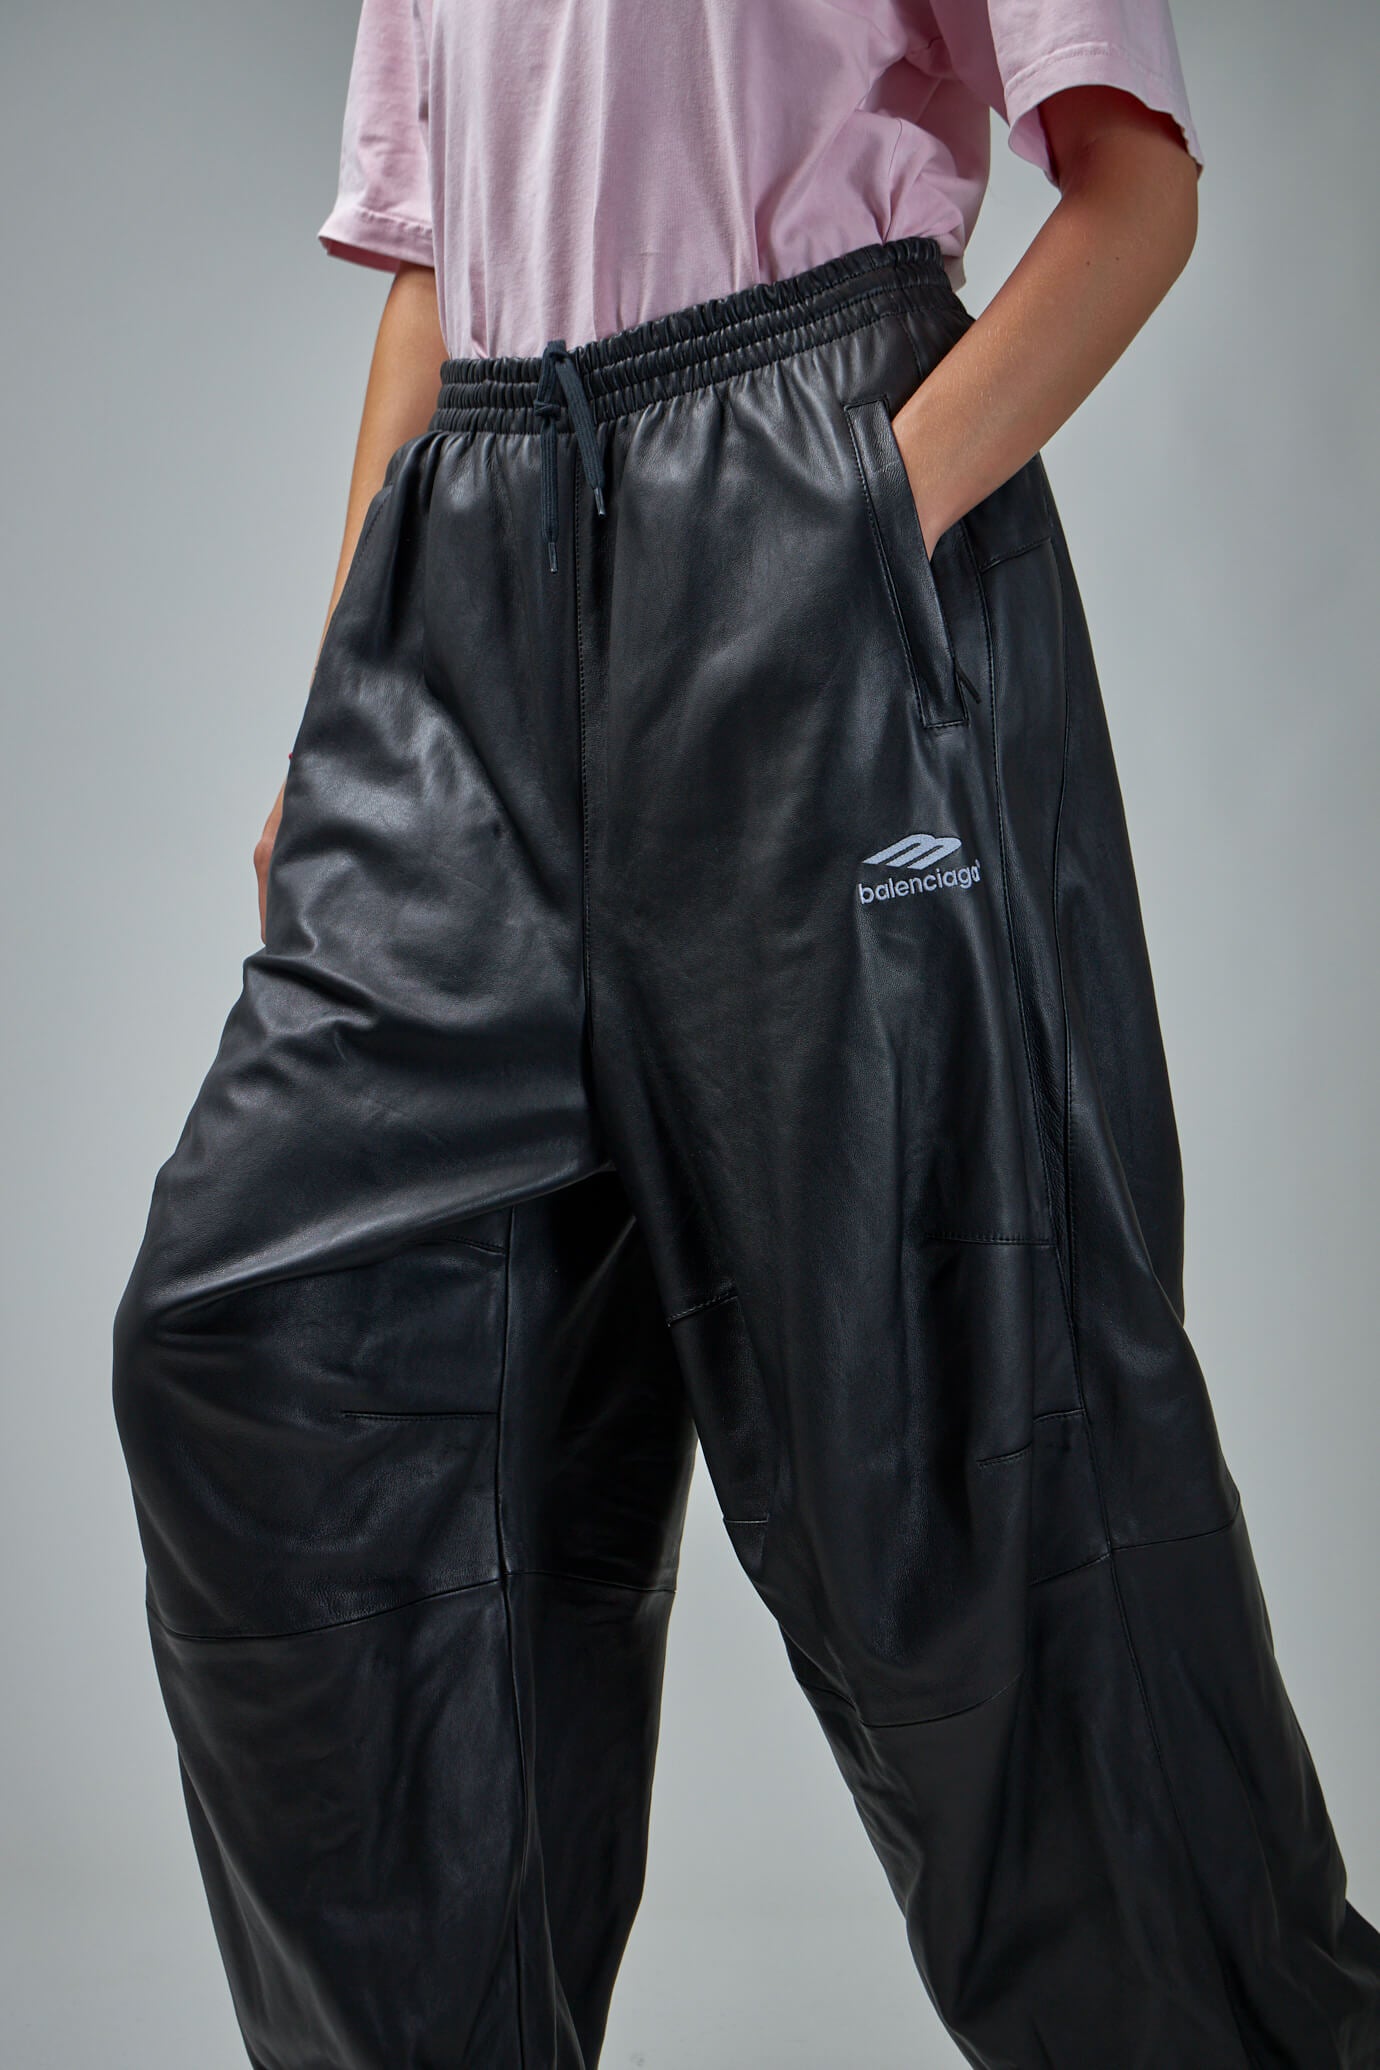 Balenciaga high-waisted leather trousers | Browns